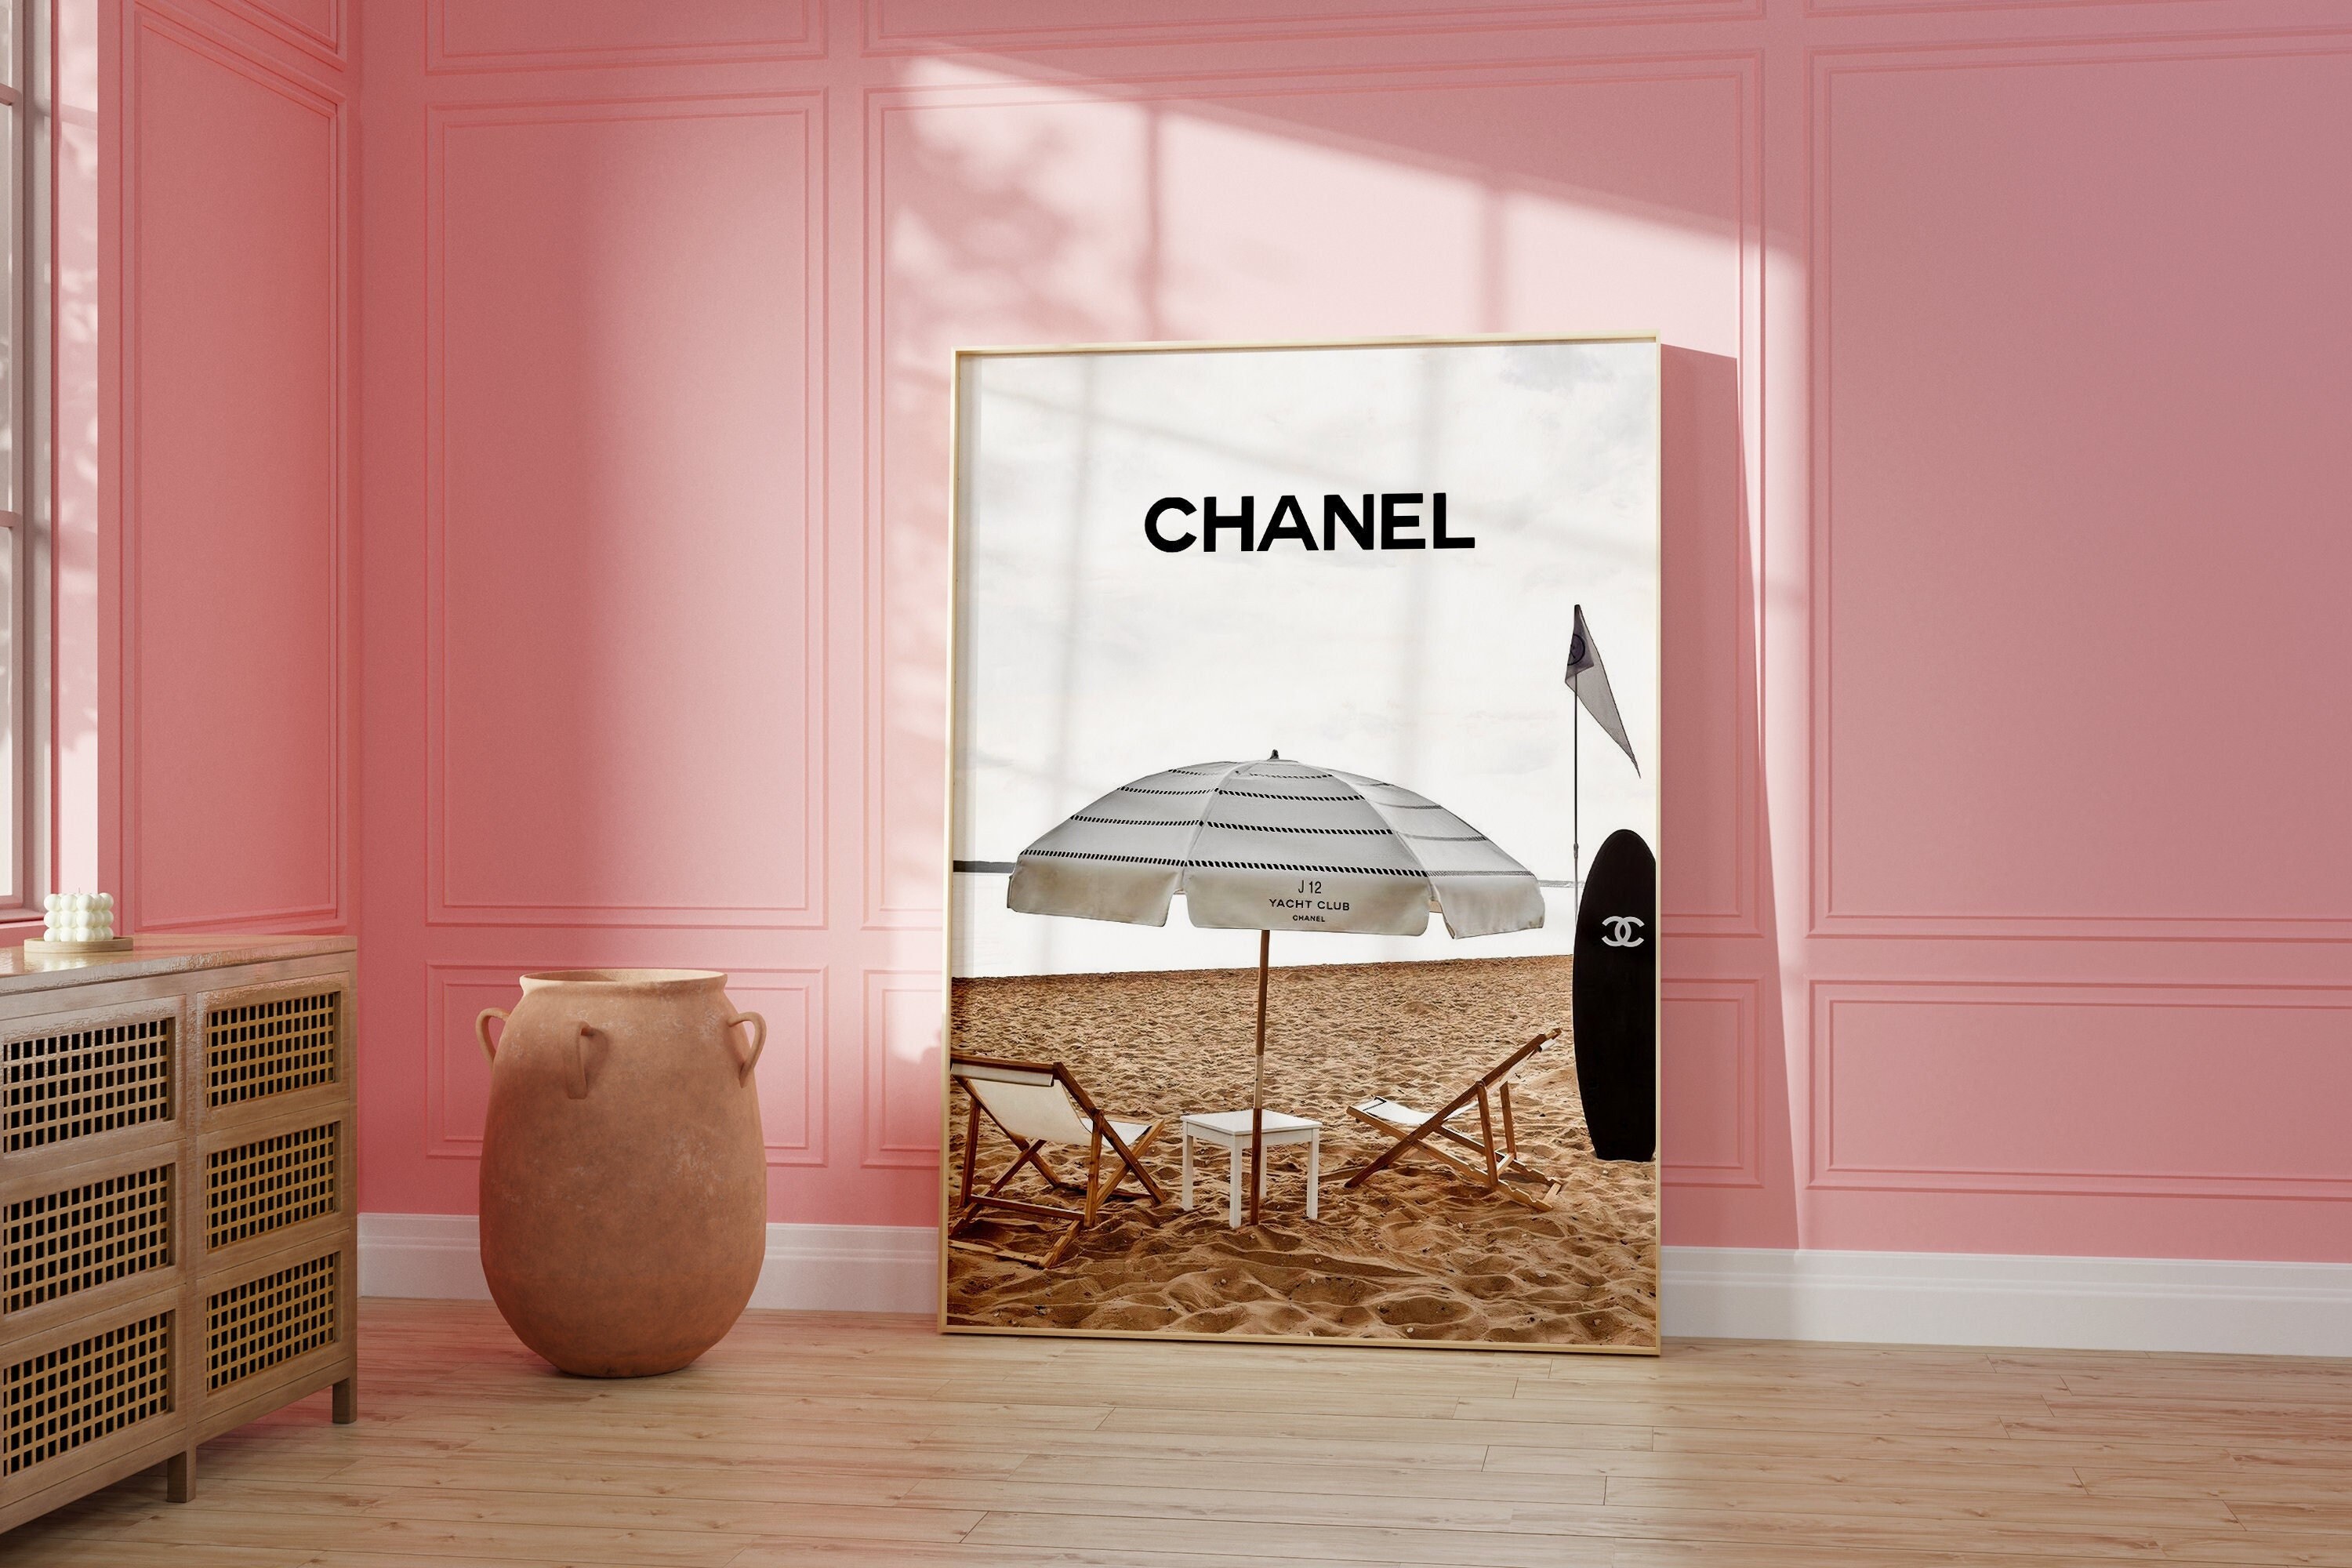 CHANEL Umbrellas for Women for sale